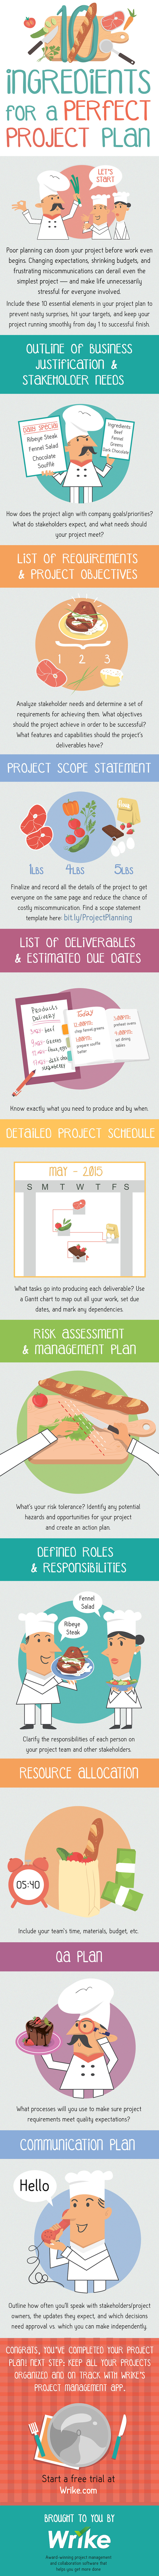 10 EssentialElements for the Perfect Project Plan - by Wrike project management software